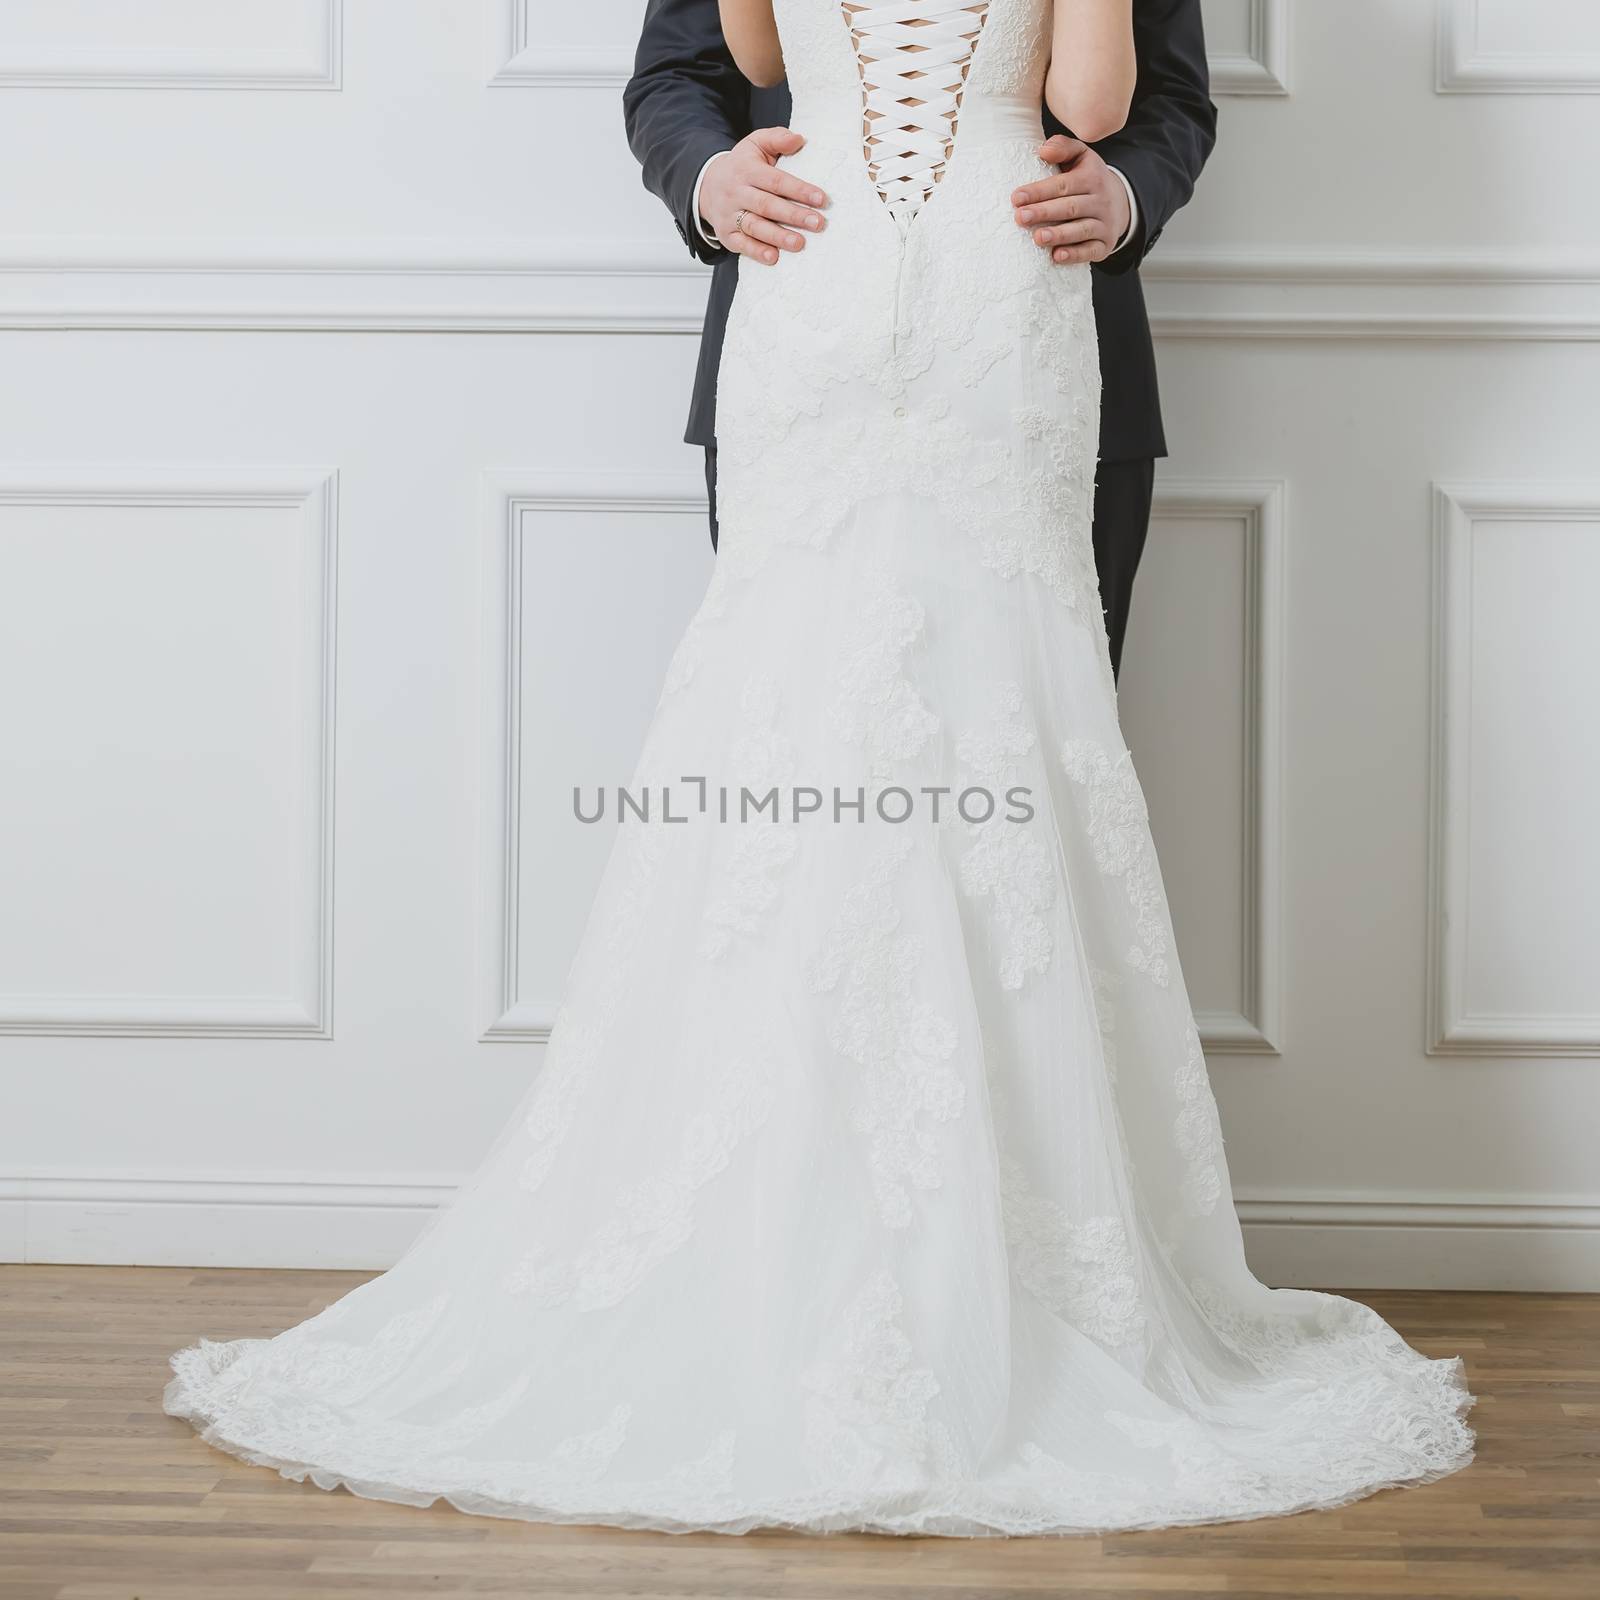 Elegant bride and groom posing together in studio on a wedding day